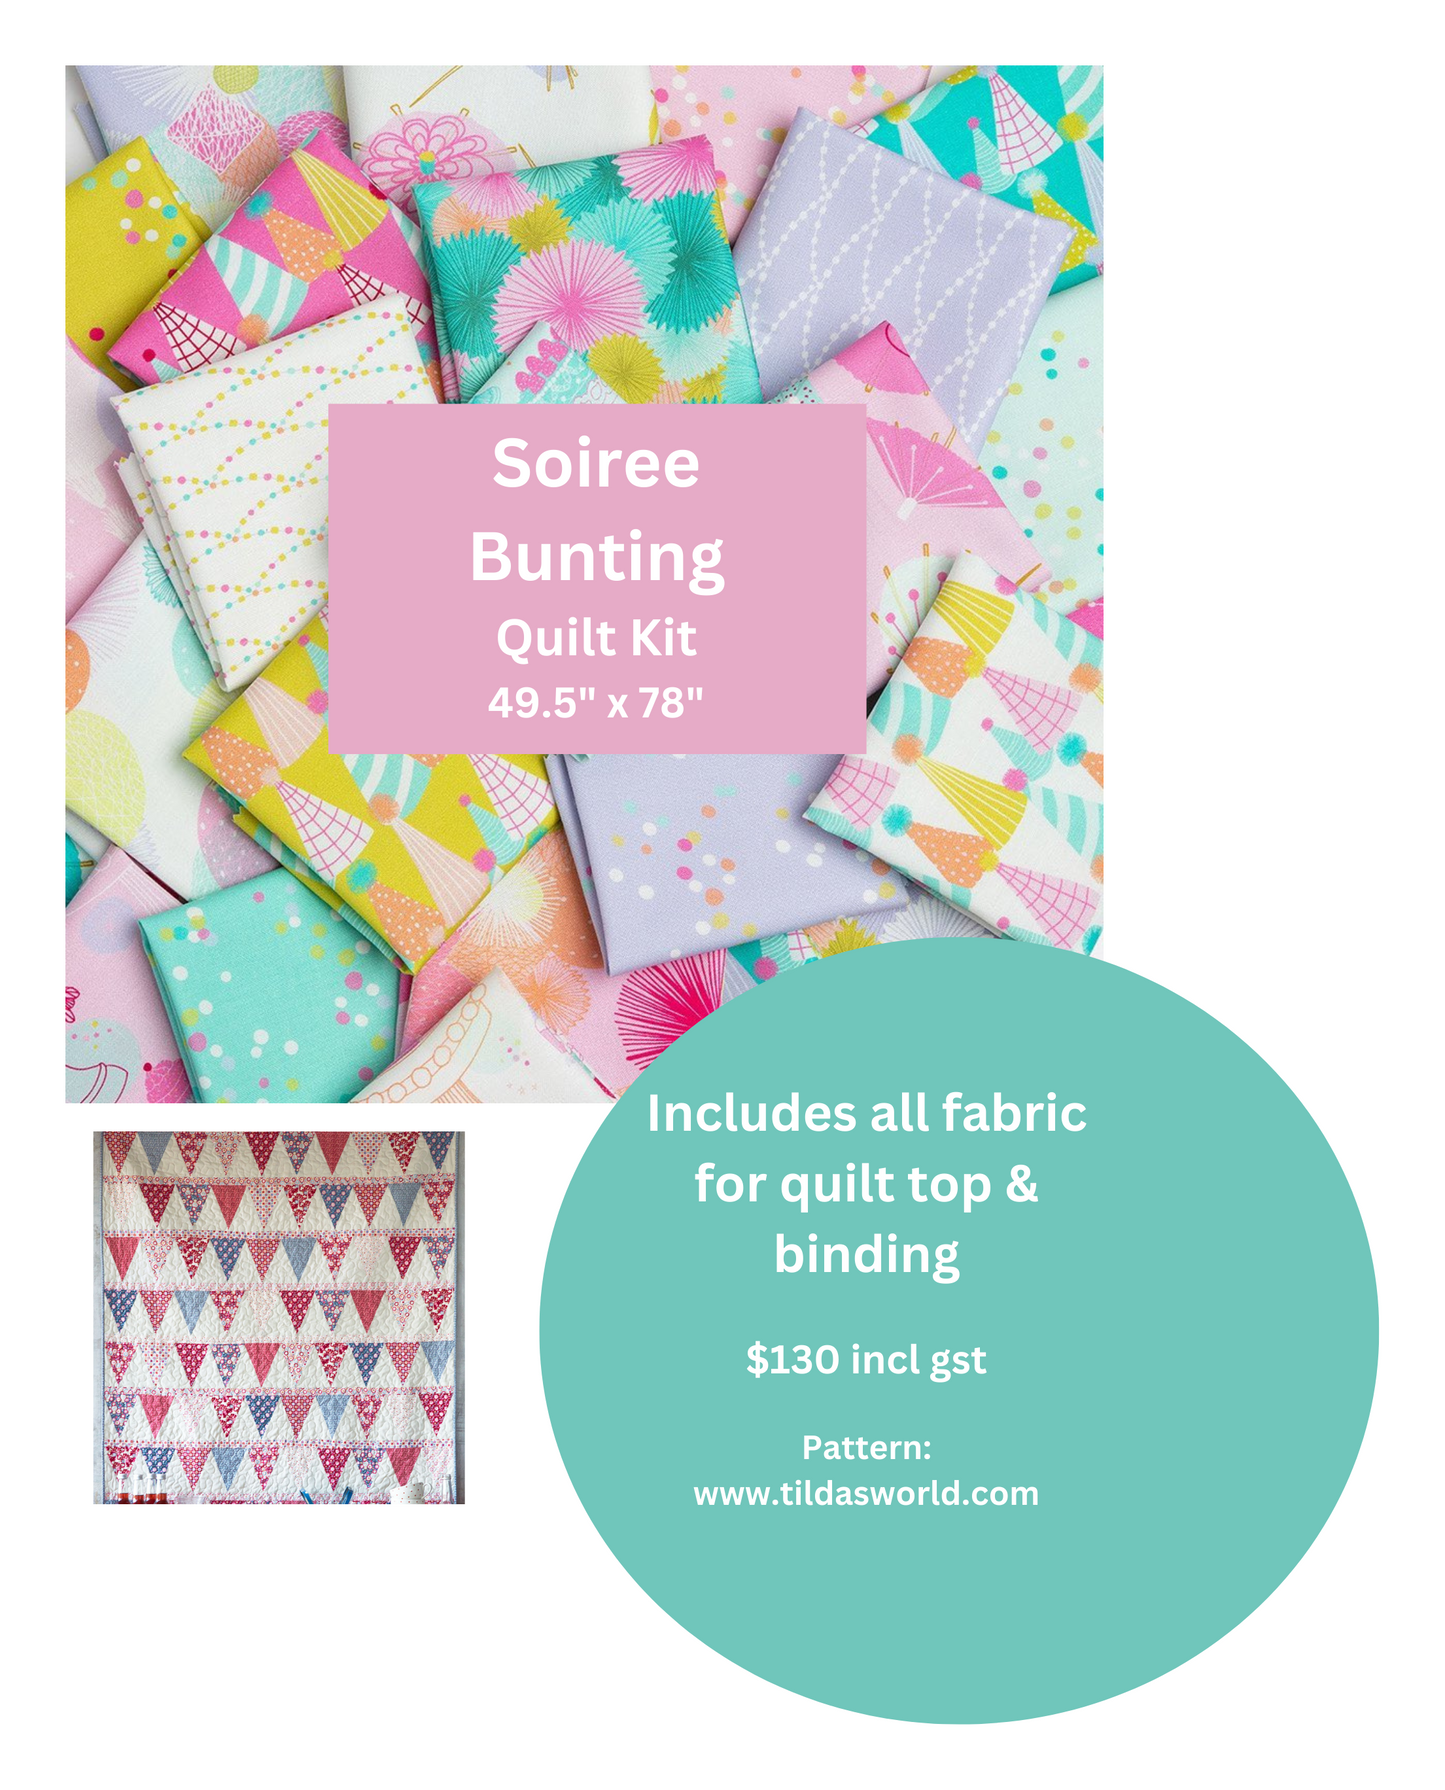 Soiree Bunting Quilt Kit